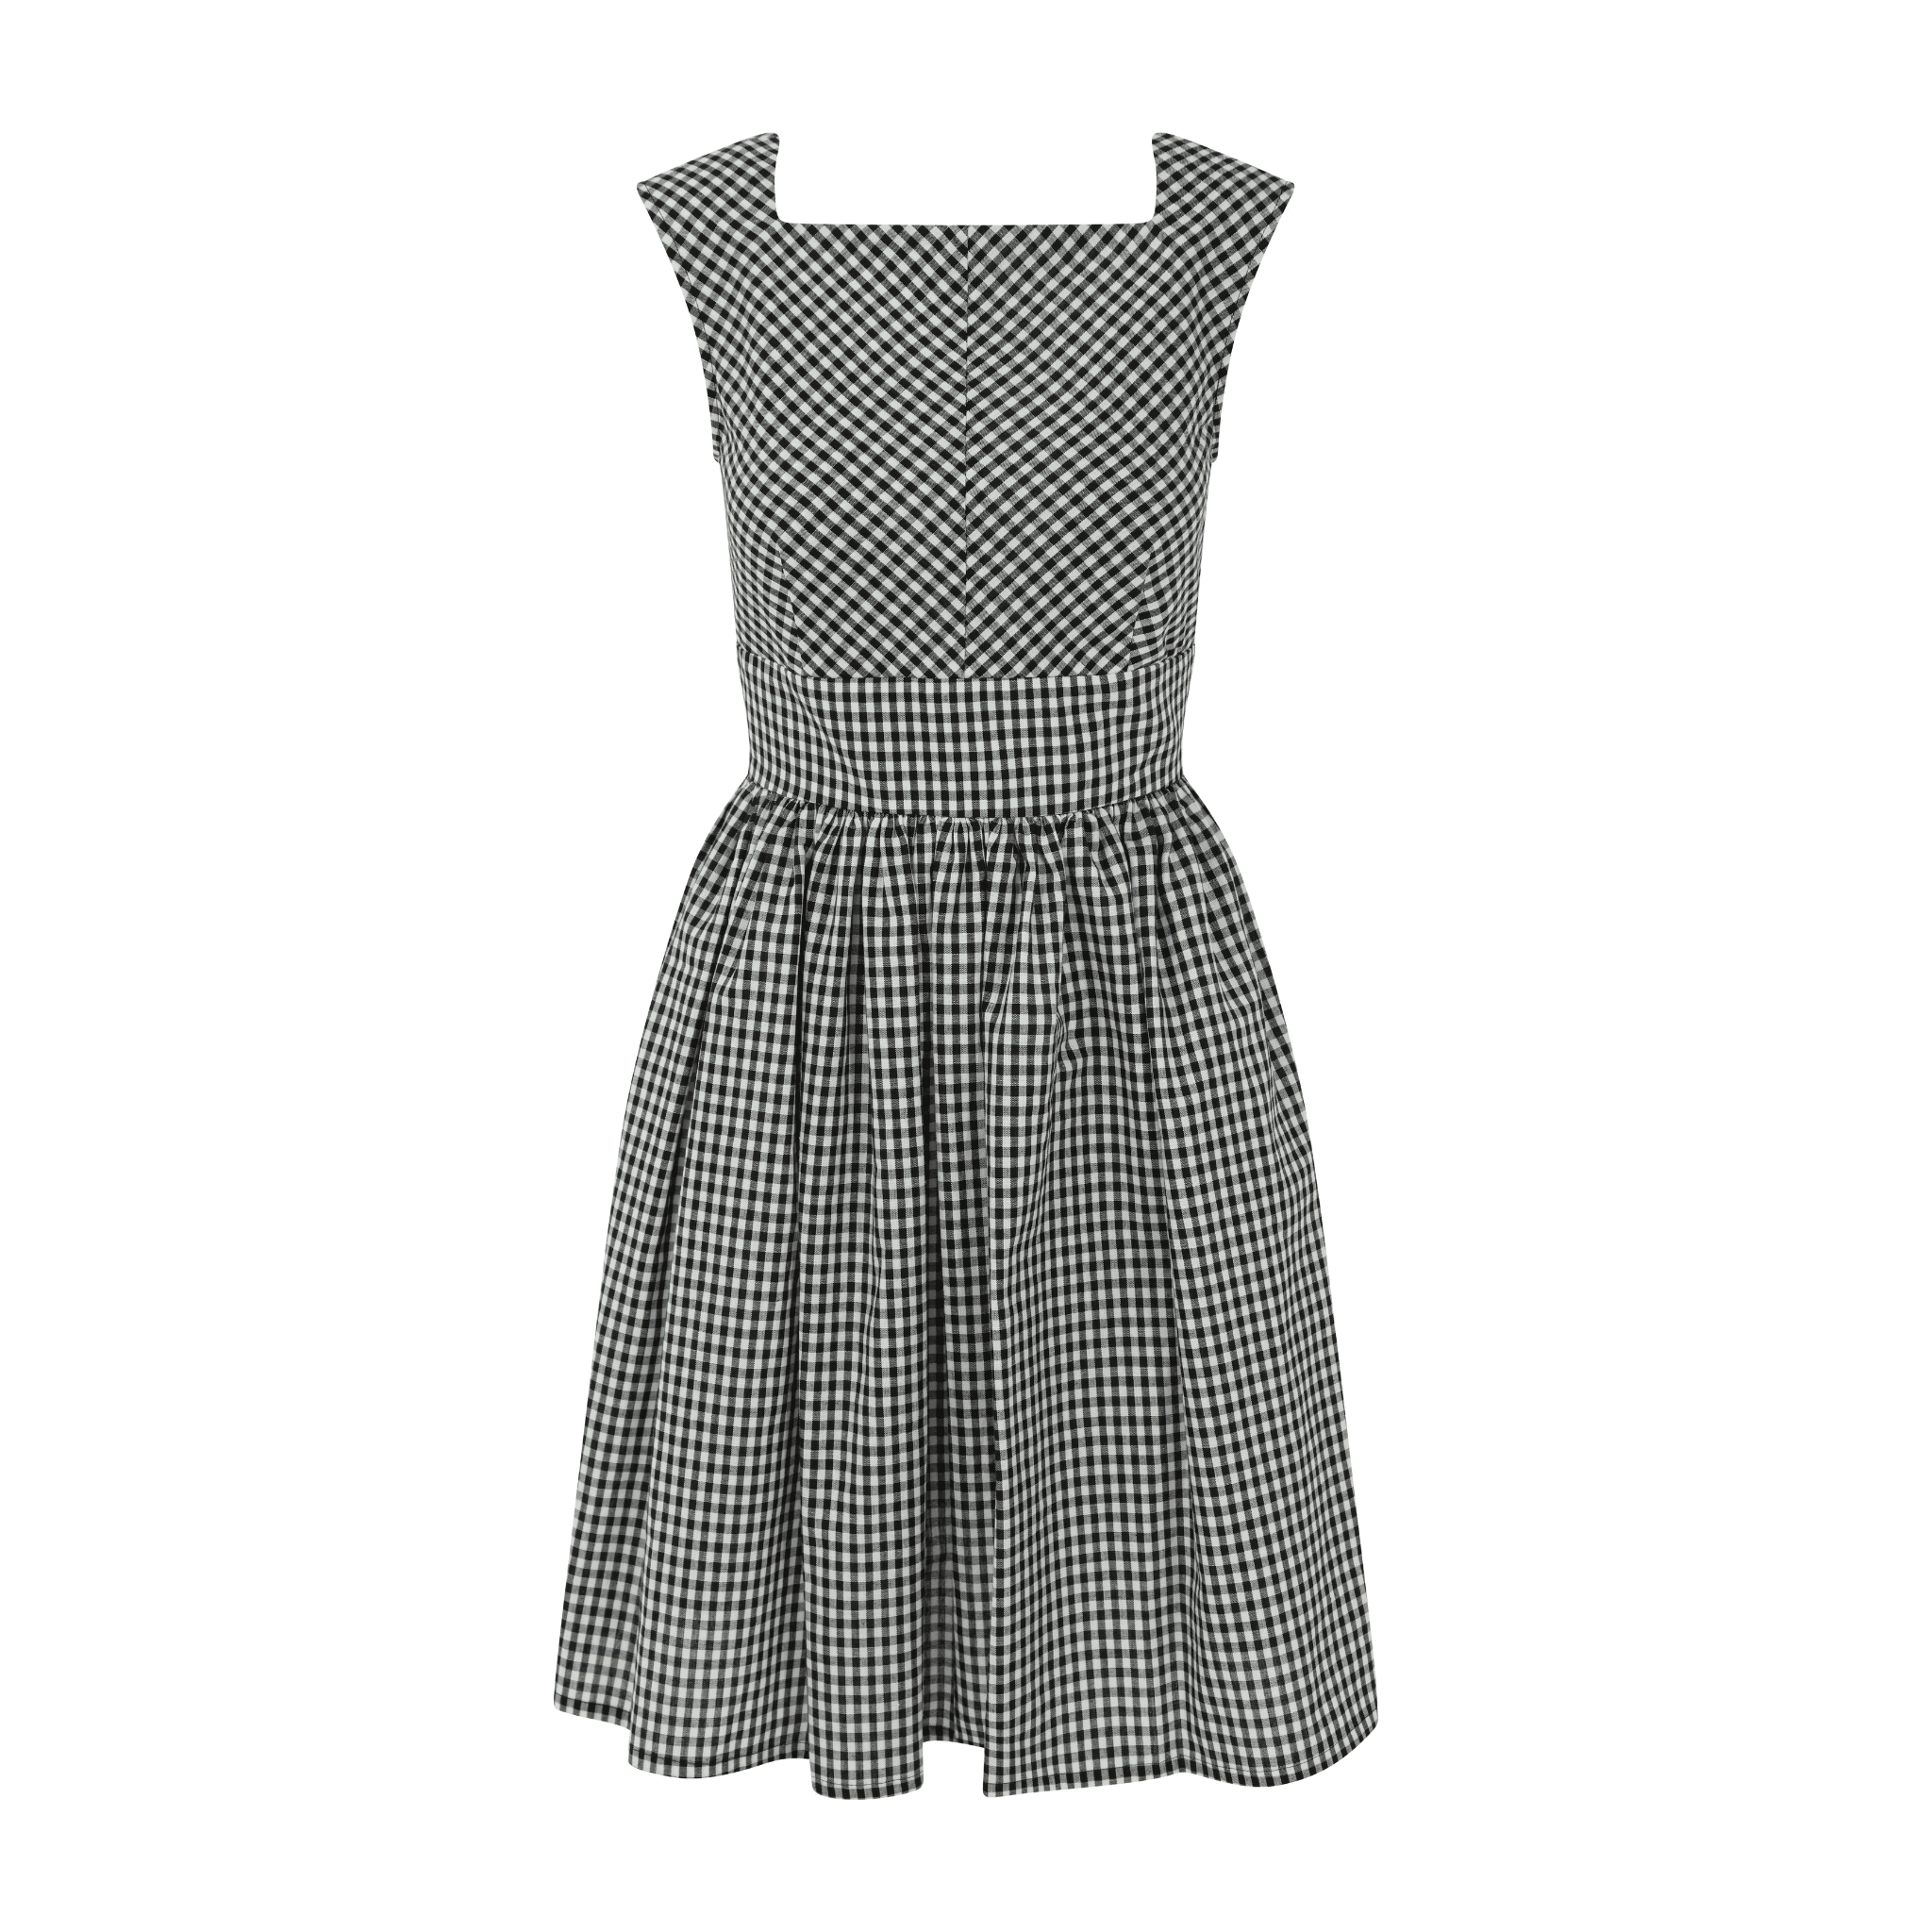 Low Back Pinafore Dress with Pockets - Sophia